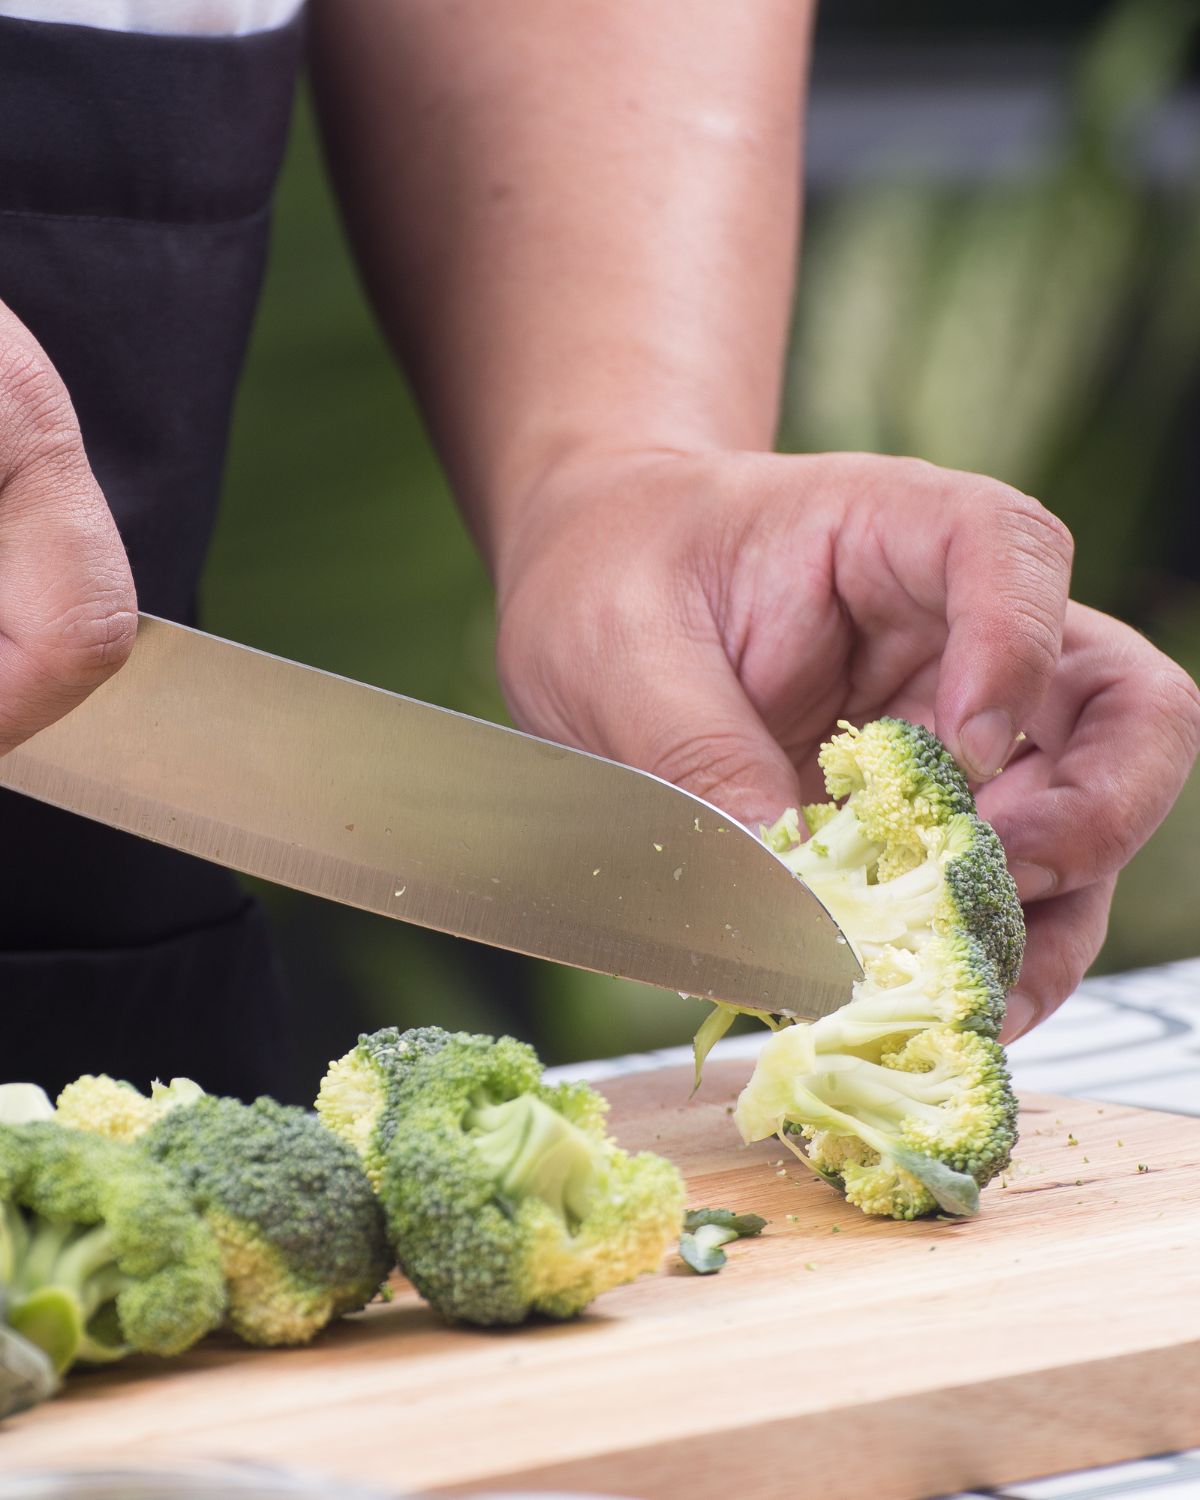 Cutting close to the heads of the broccoli.